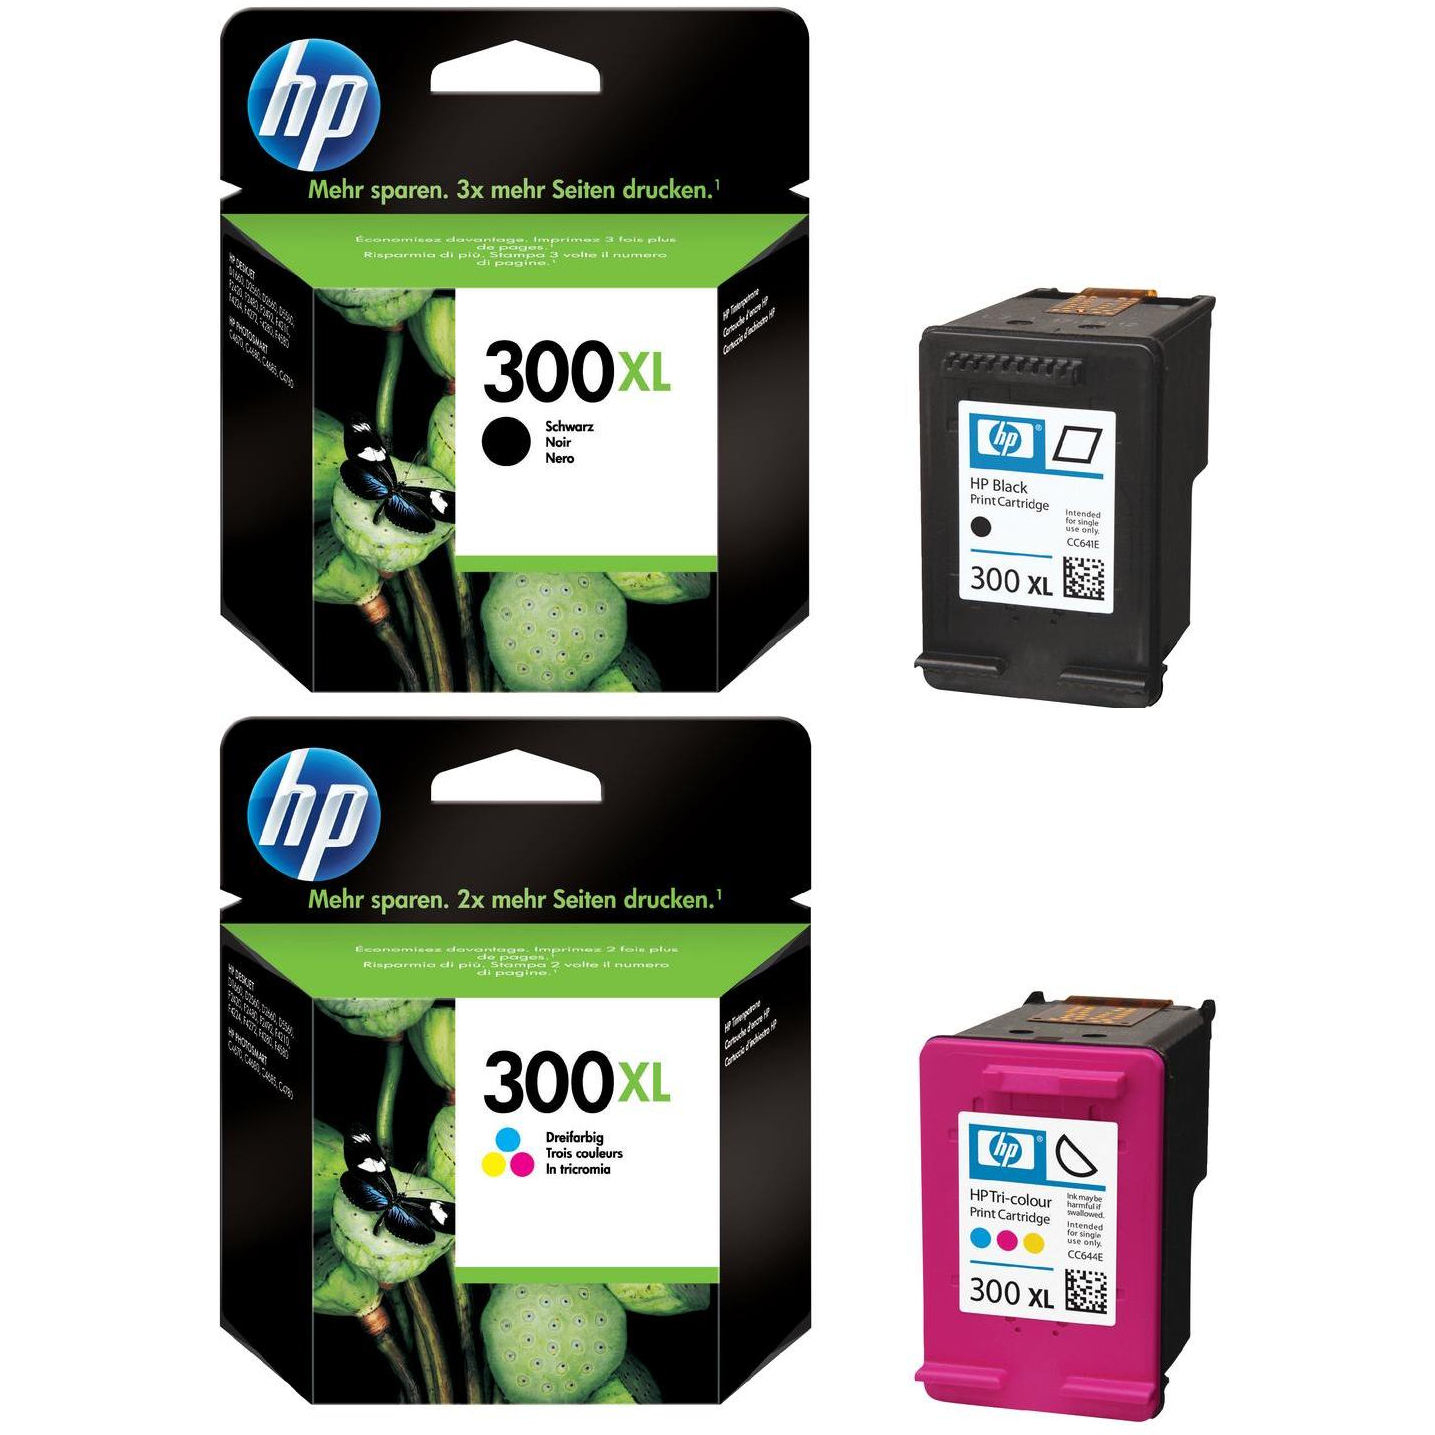 Related to Deskjet 4280 Ink: HP-300XL-Pack